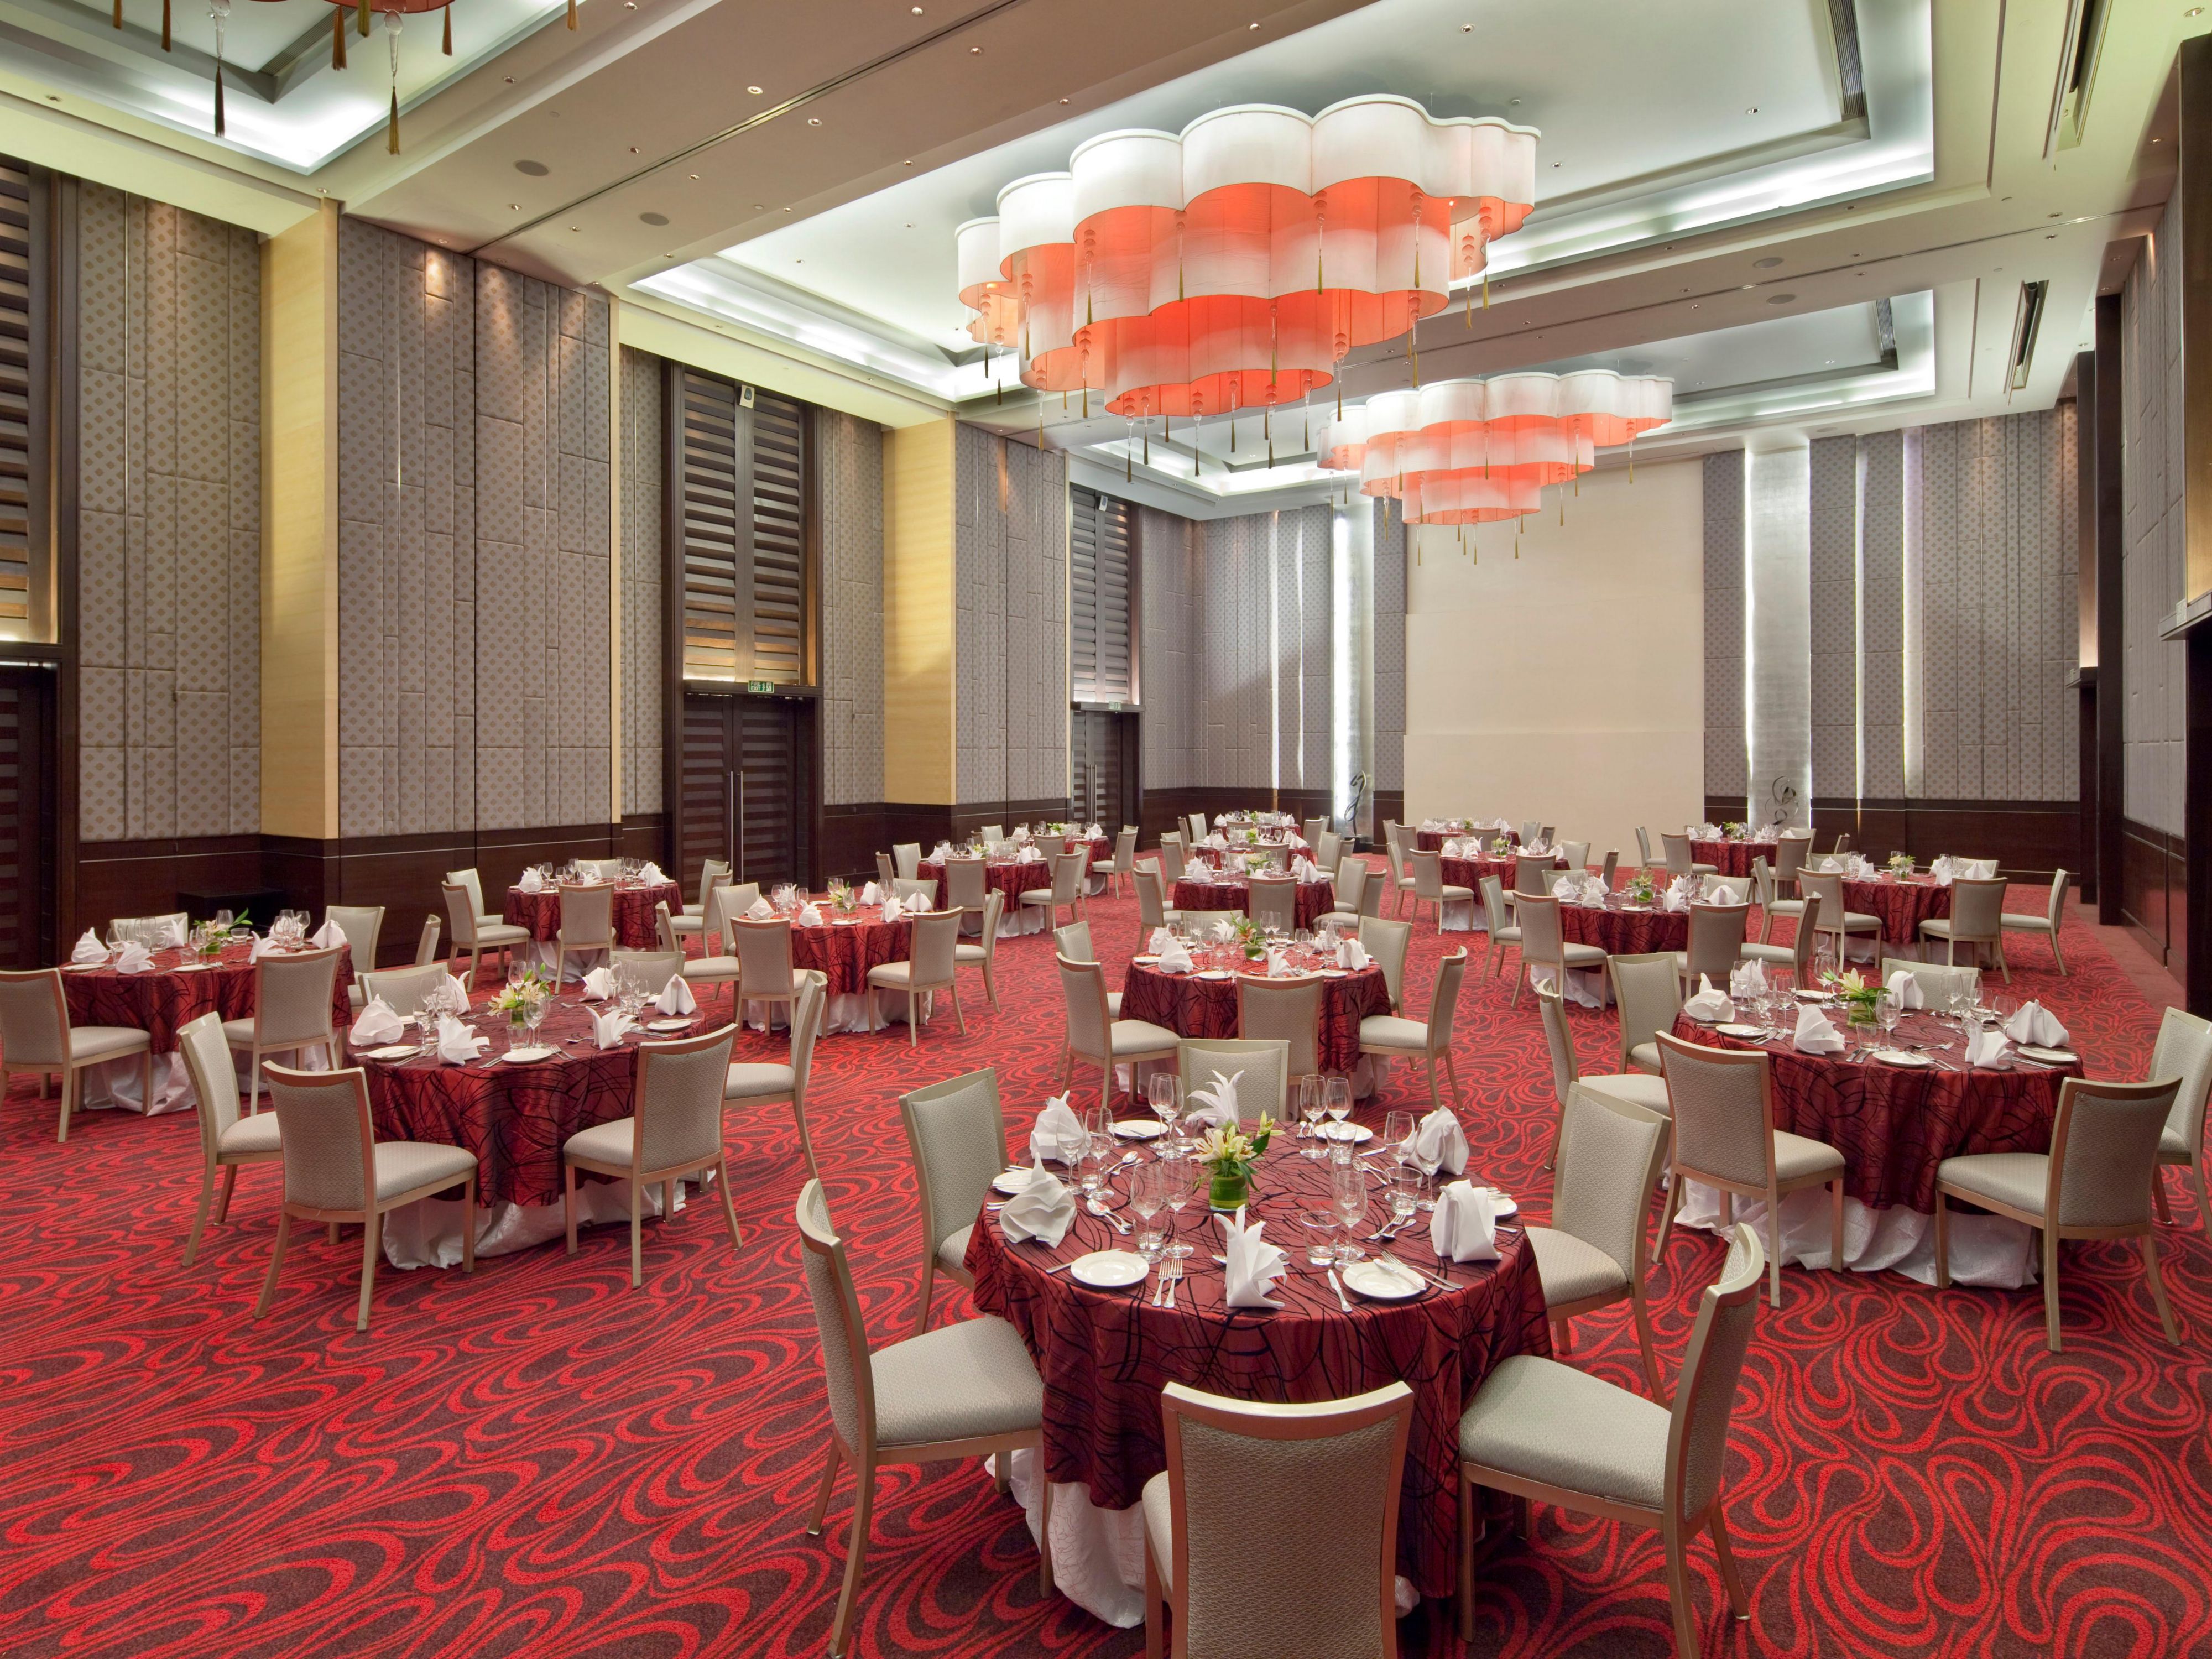 The spacious grand ballroom 4000 sq.feet with 22 feet height can cater to 700 guests for special fuctions like: reception, wedding, mehendi and sangeet, engagement ceremony, social functions and cocktail parties. State-of-the art amenities, a customized menu and a plethora of decor options await you at Holiday Inn Mumbai